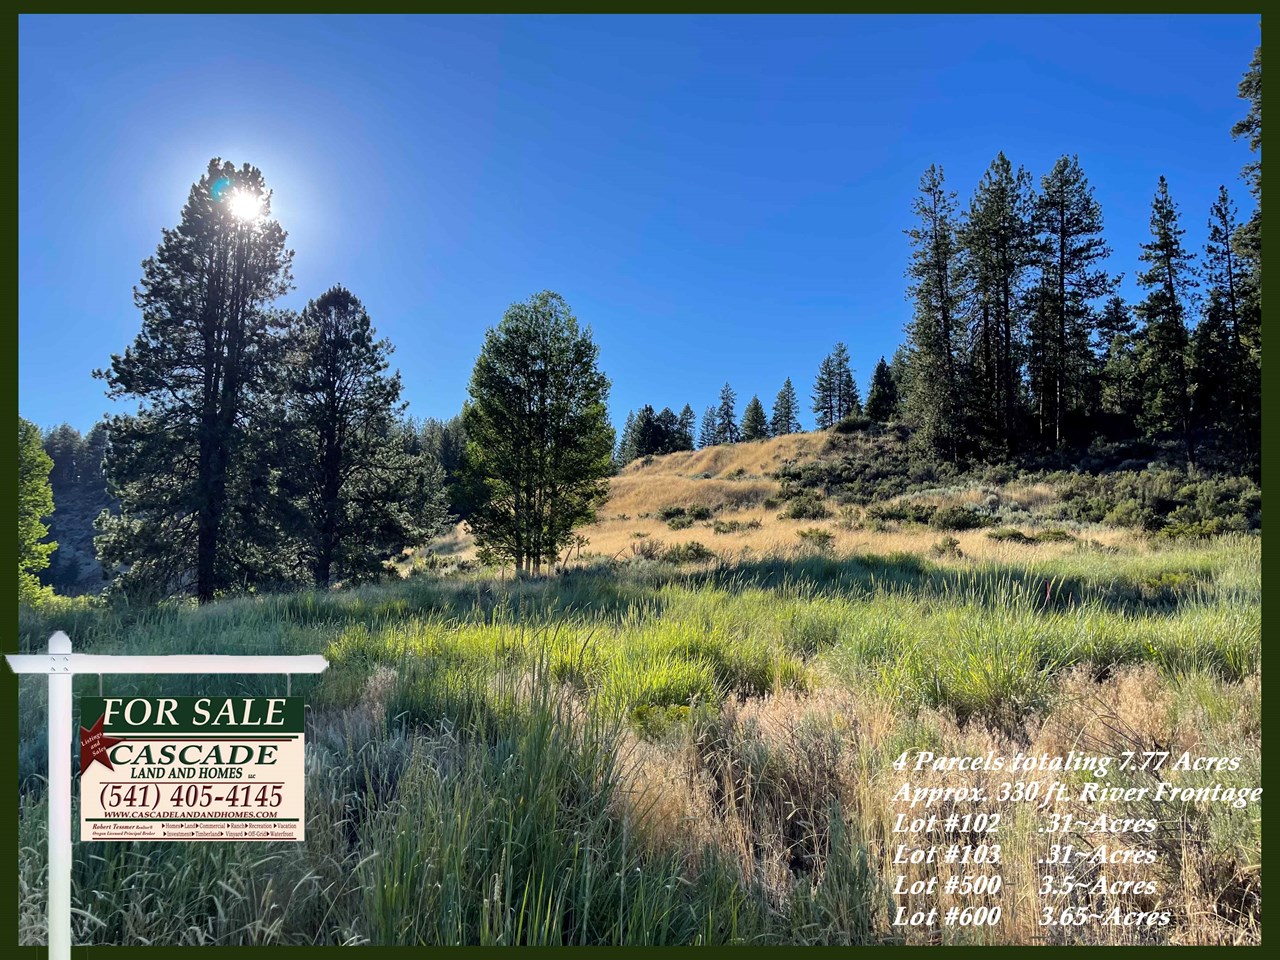 the varied terrain of the property offers many possible building sites. the large 7.77 (lucky sevens!) acre property, and the varied landscape offer many possible areas for homesites. 



mls # 220156878 
lot #102, #103
2610/2620 south chiloquin road, chiloquin, oregon